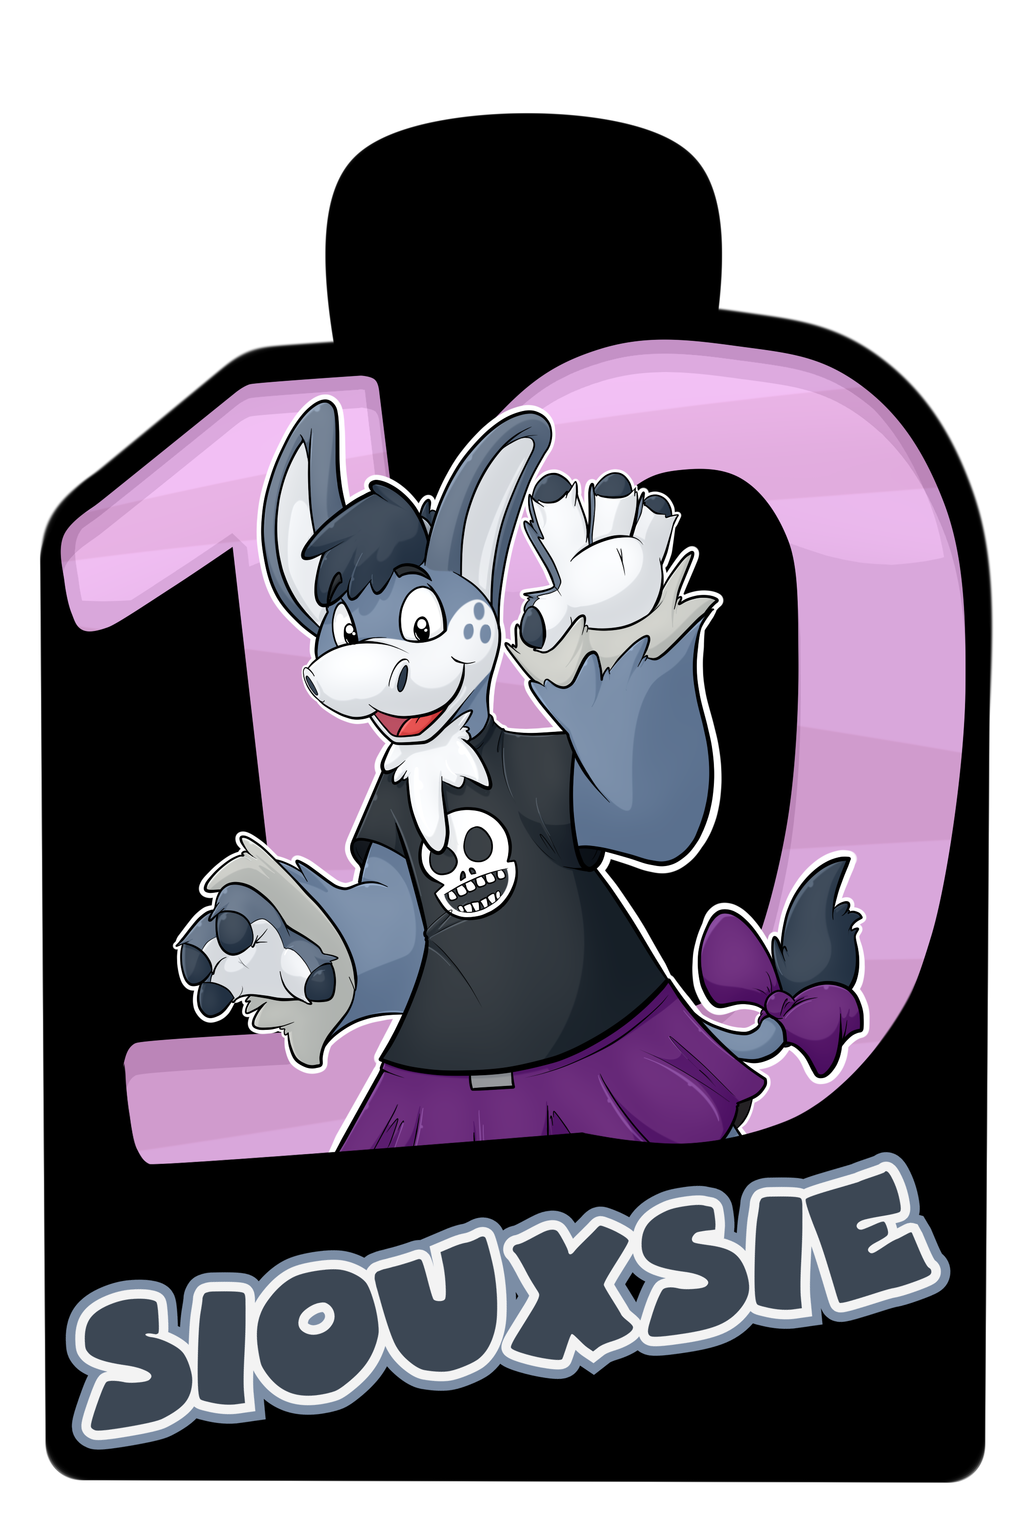 Confuzzled 2017 Badges - Siouxsie